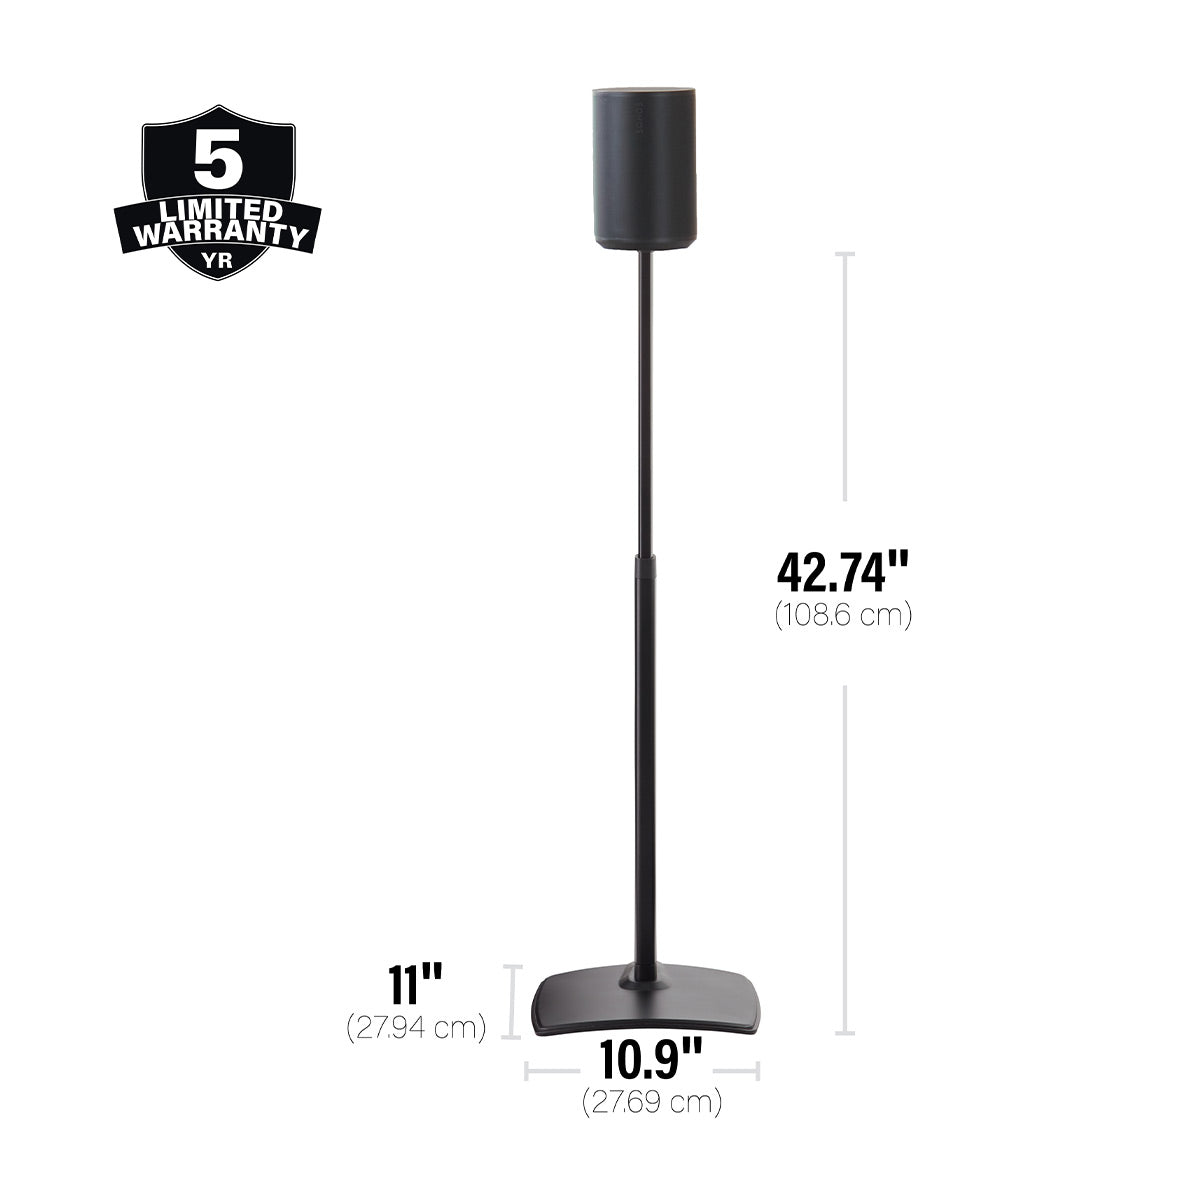 Sanus Wireless Speaker Stands for Sonos ERA 300™ (Black) - Pair, Perfect  Stand Setup for Easy and Secure Mounting of New Sonos Era 300™ Speakers 